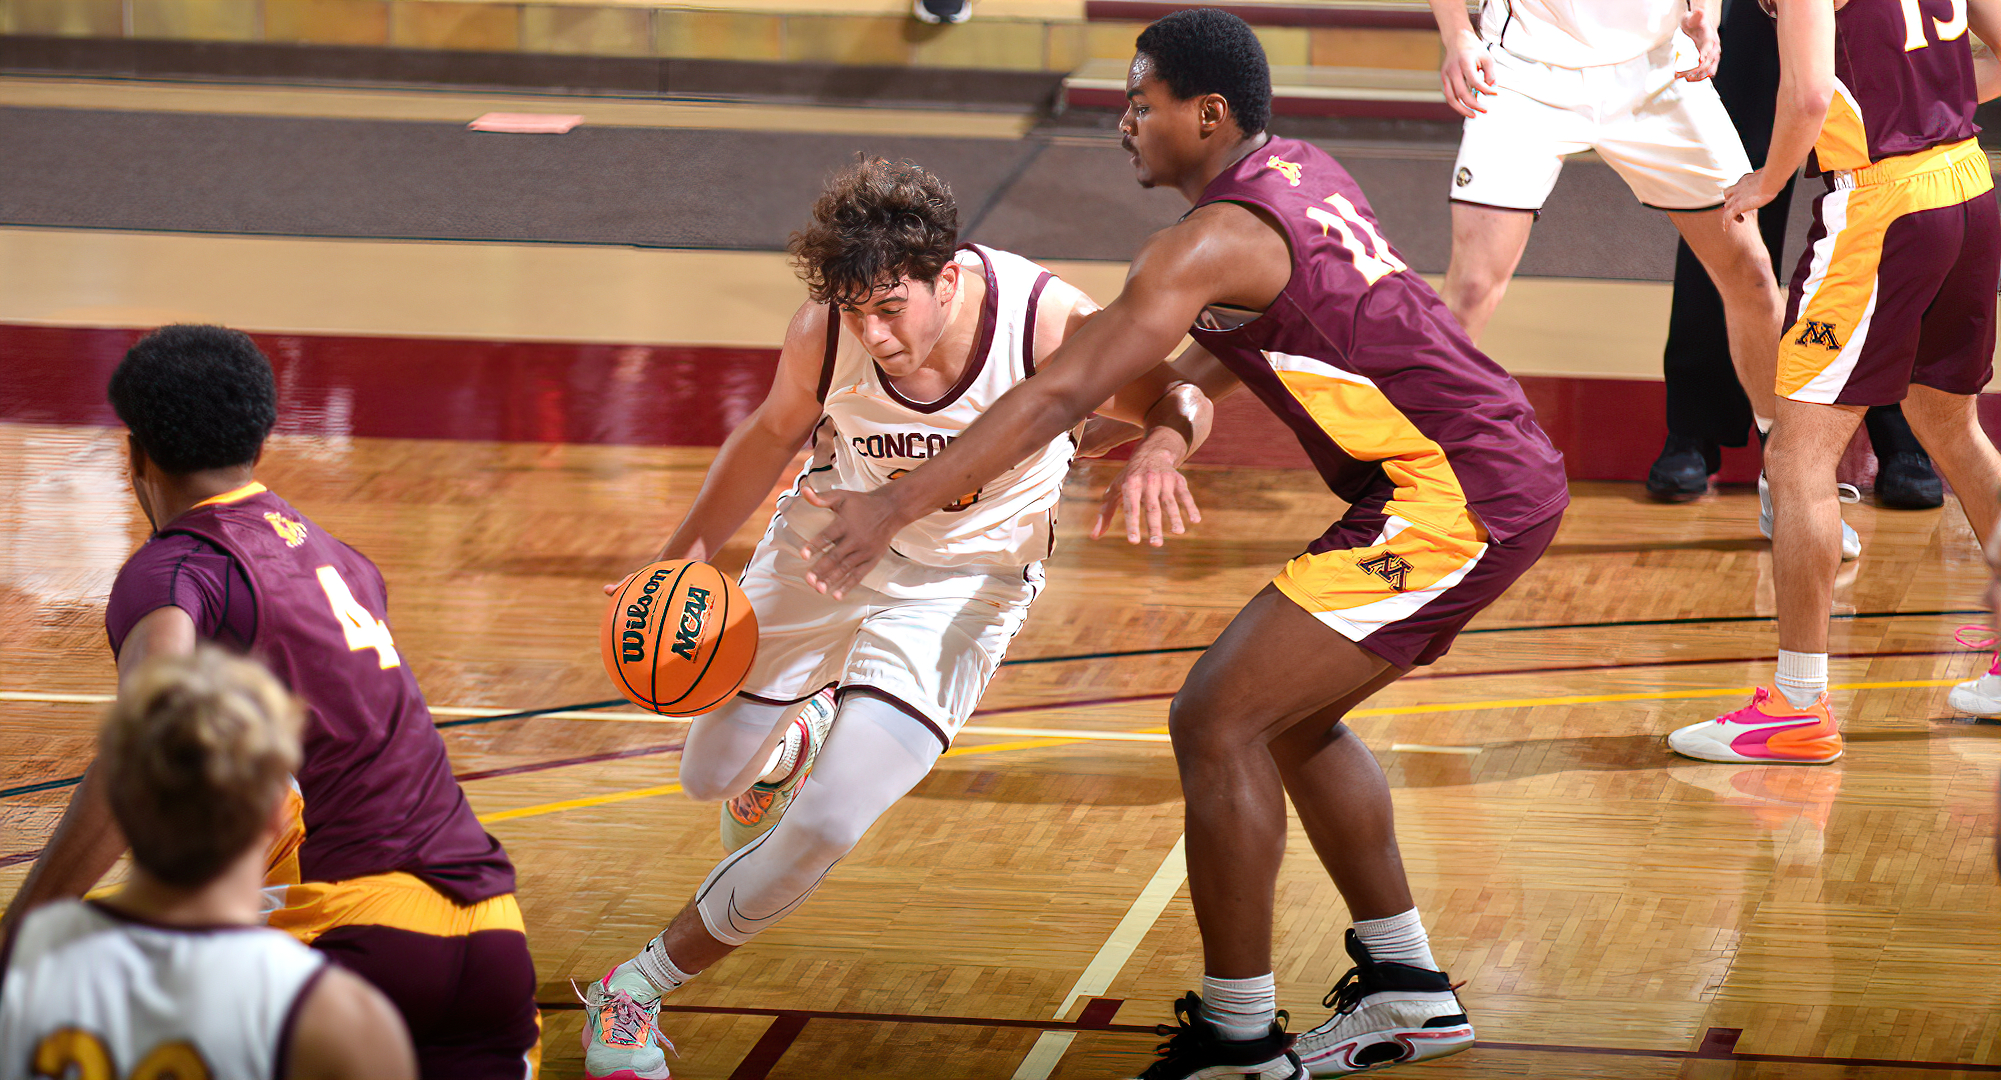 Freshman Jacob Cook drives to the basket for two of his team-high 12 points in the Cobbers' season opener against Minn.-Morris.